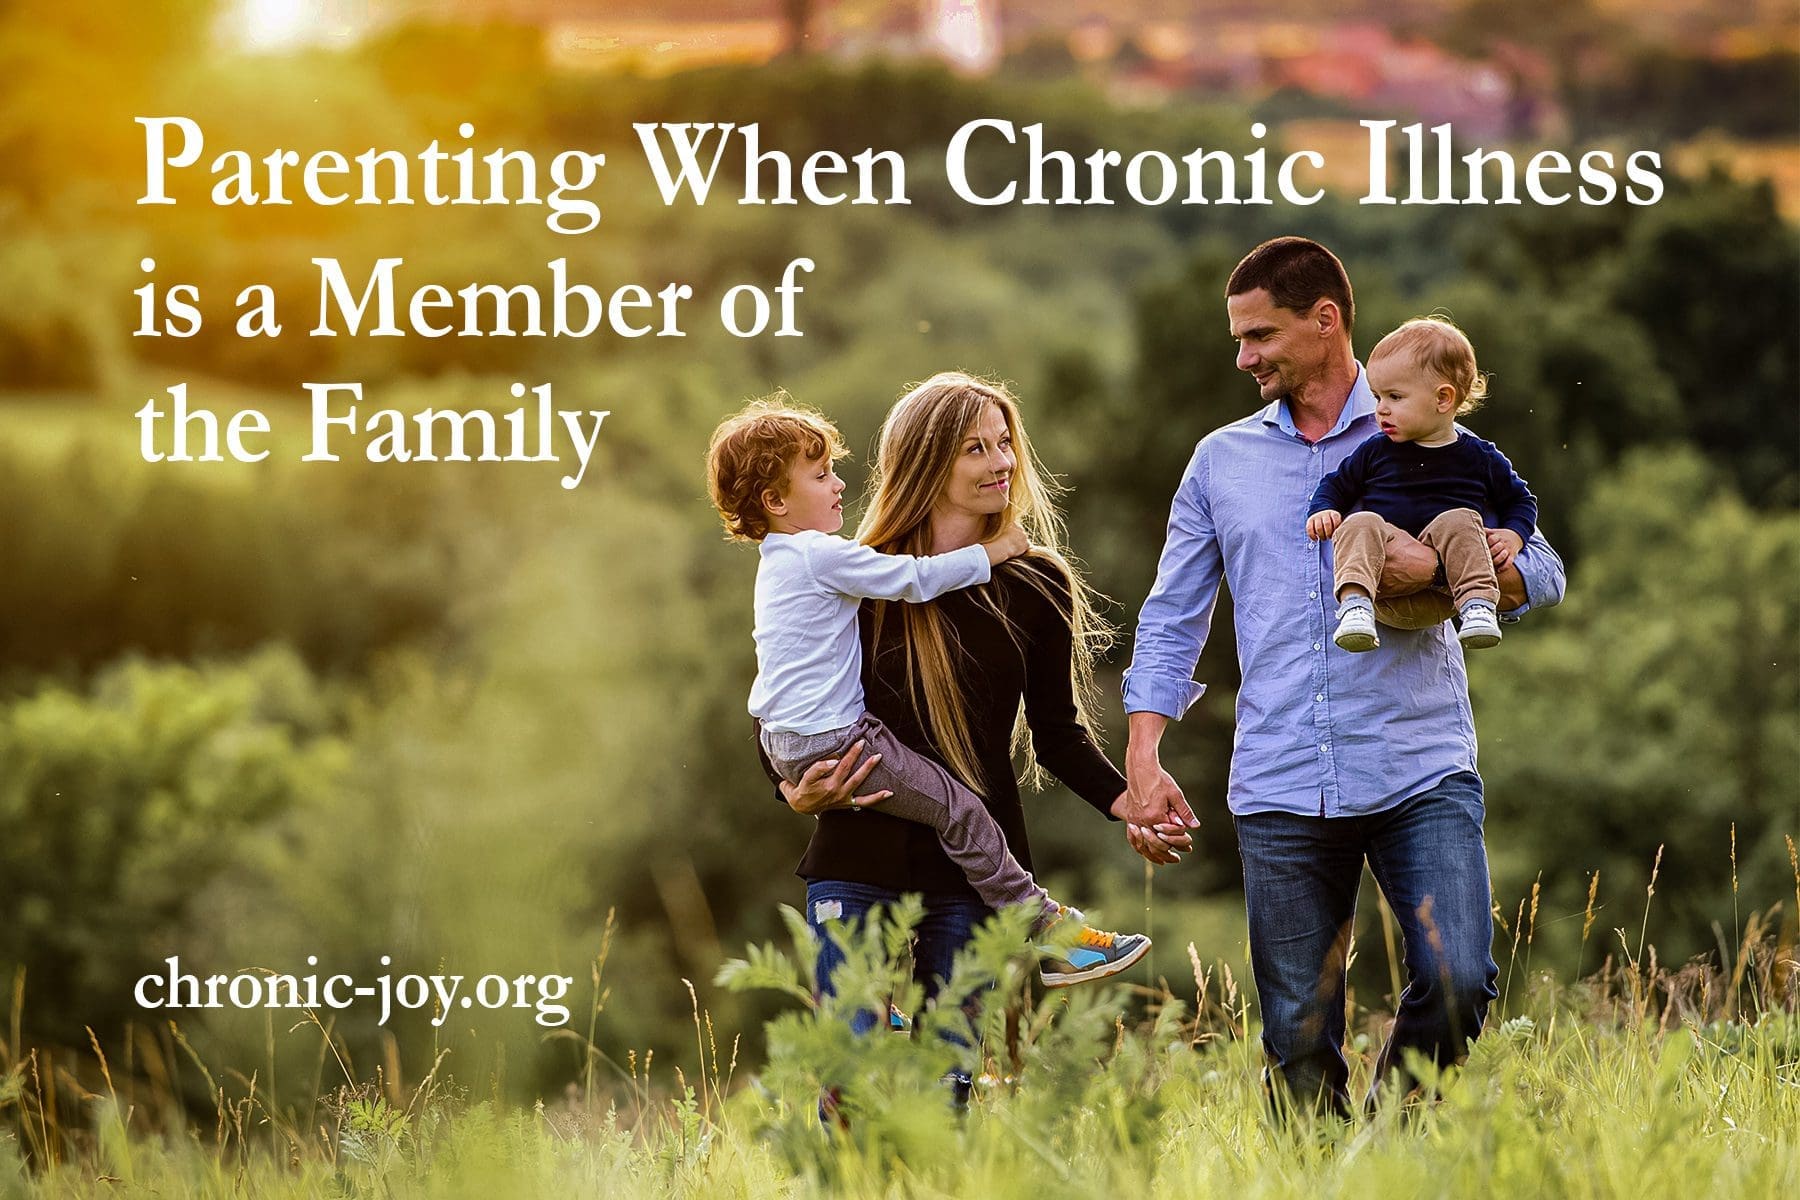 Parenting When Chronic Illness is a Member of the Family